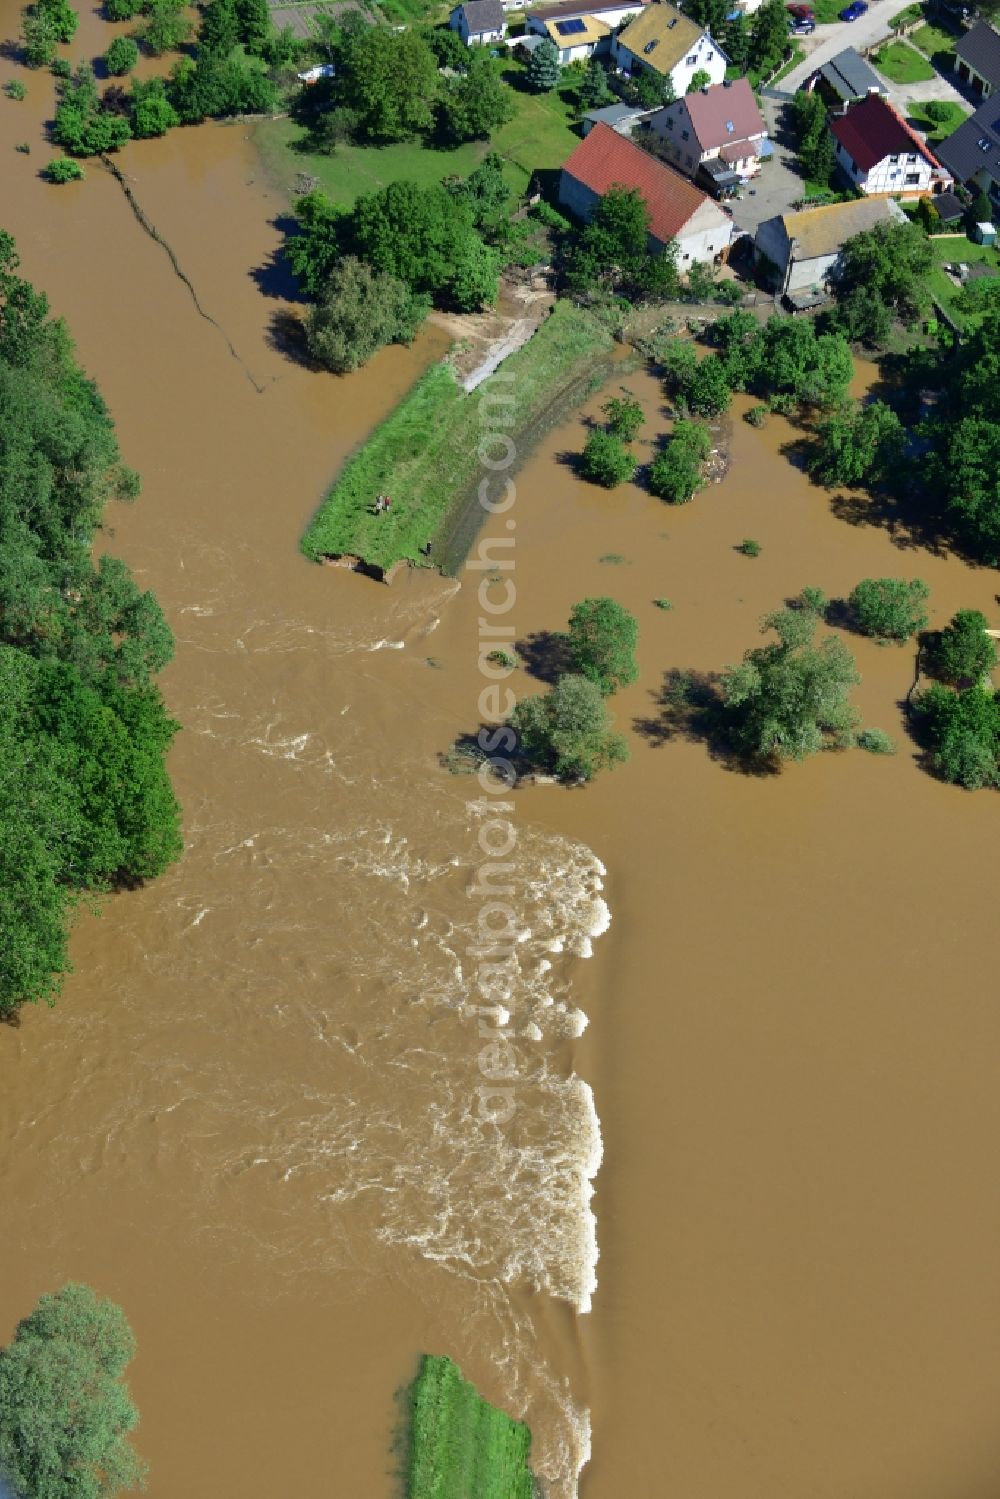 Laußig from the bird's eye view: Flood level - situation from flooding and overflow of the bank of the Mulde in Laußig in Saxony